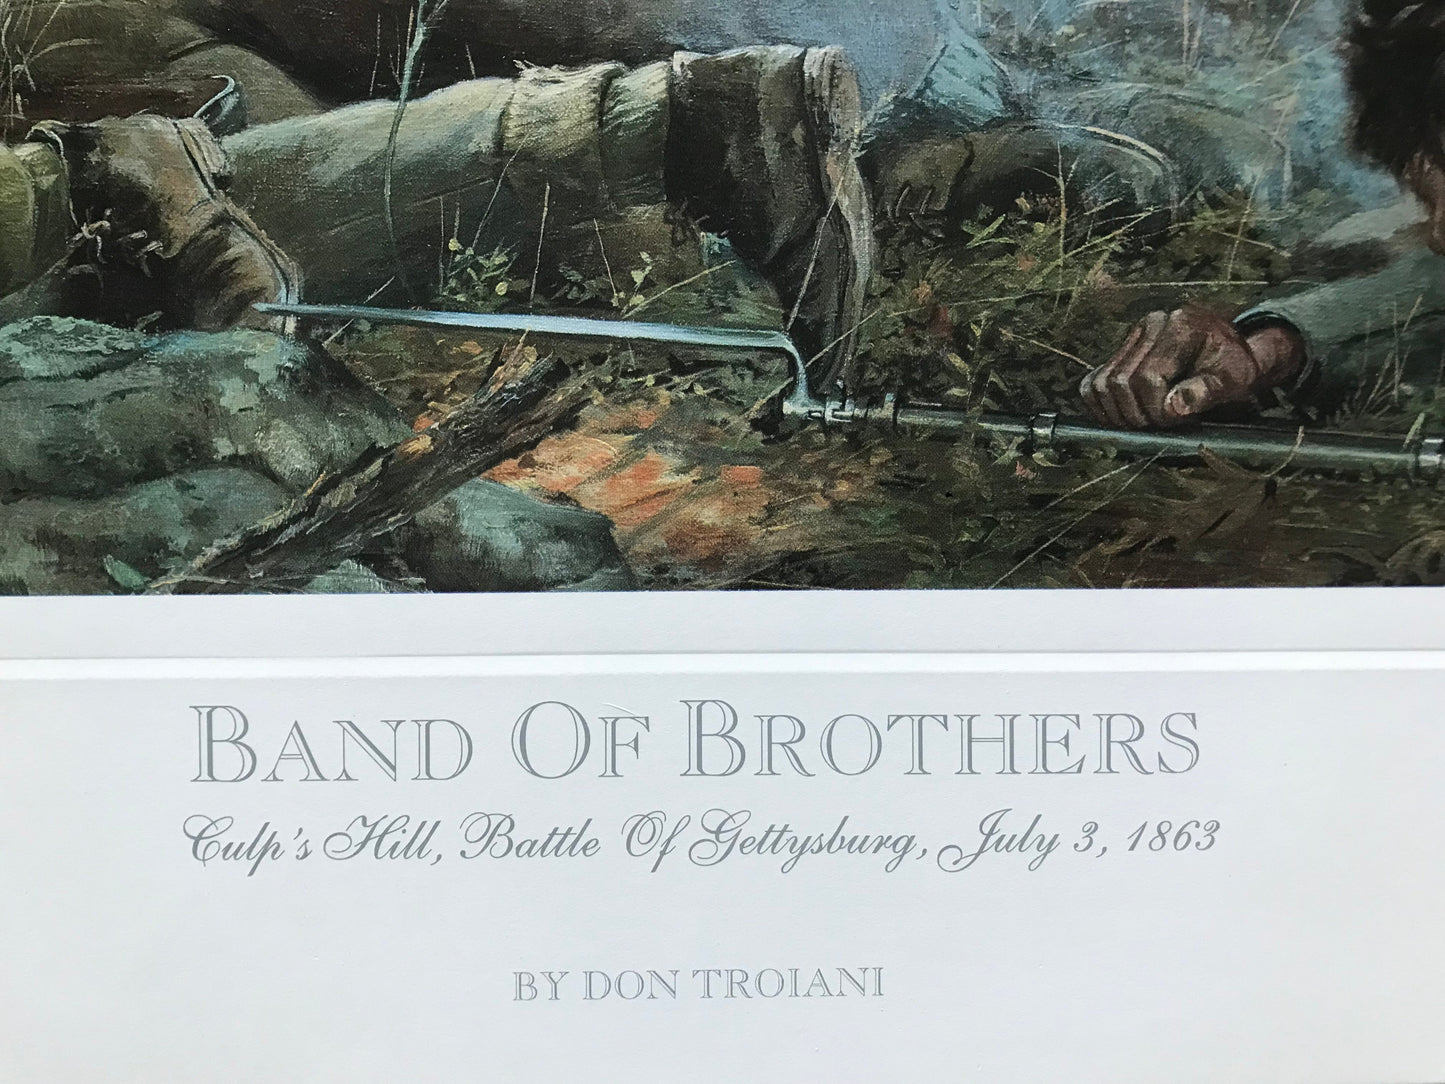 BAND OF BROTHERS -  A Limited Edition Civil War Print by Don Troiani